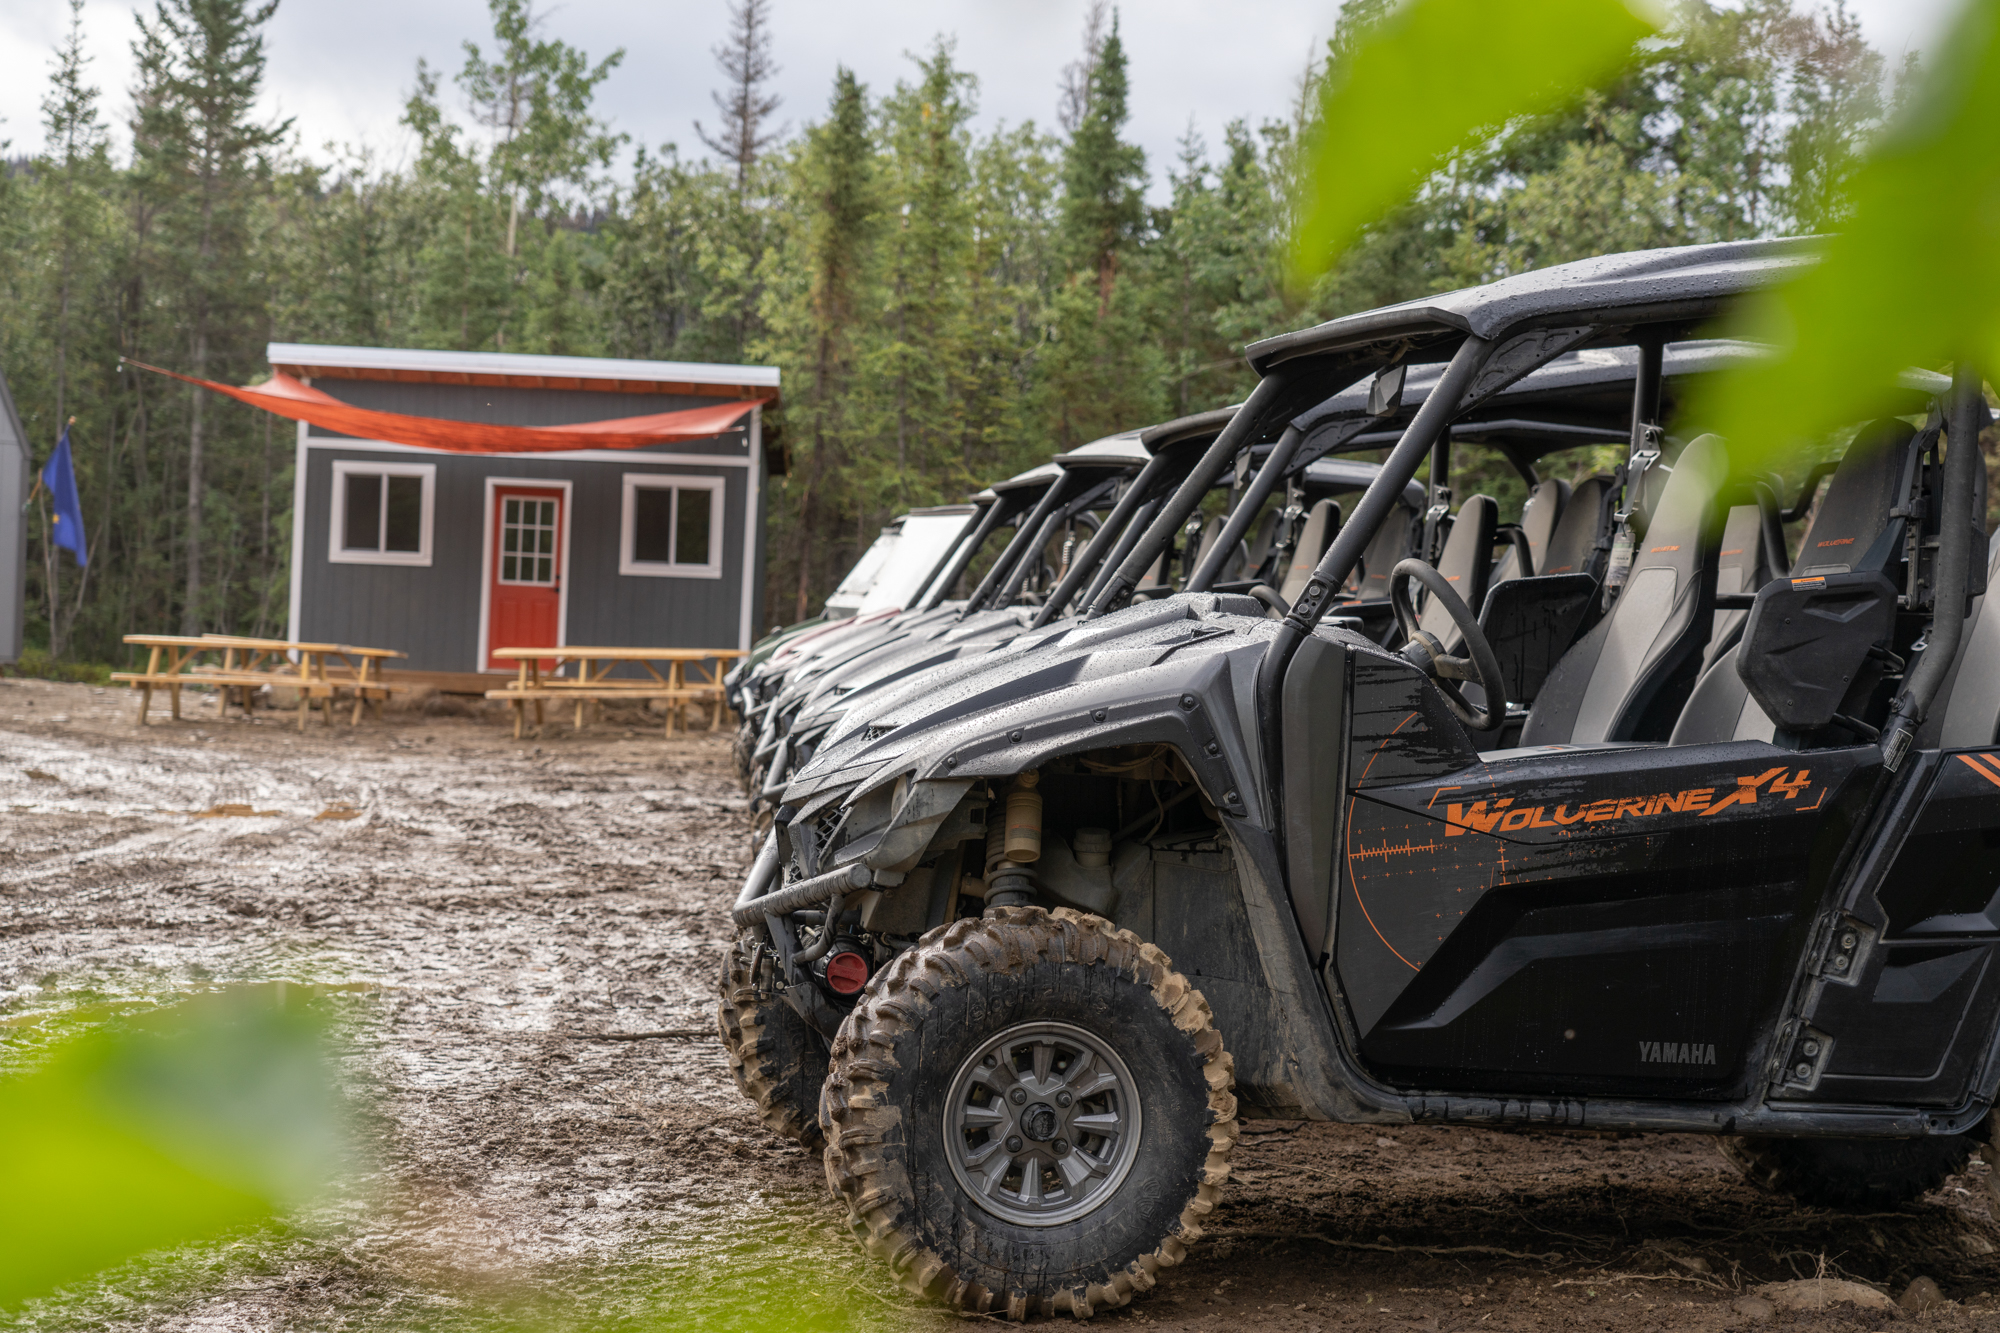 A row of Wolverine UTVs parked in front of a shed.